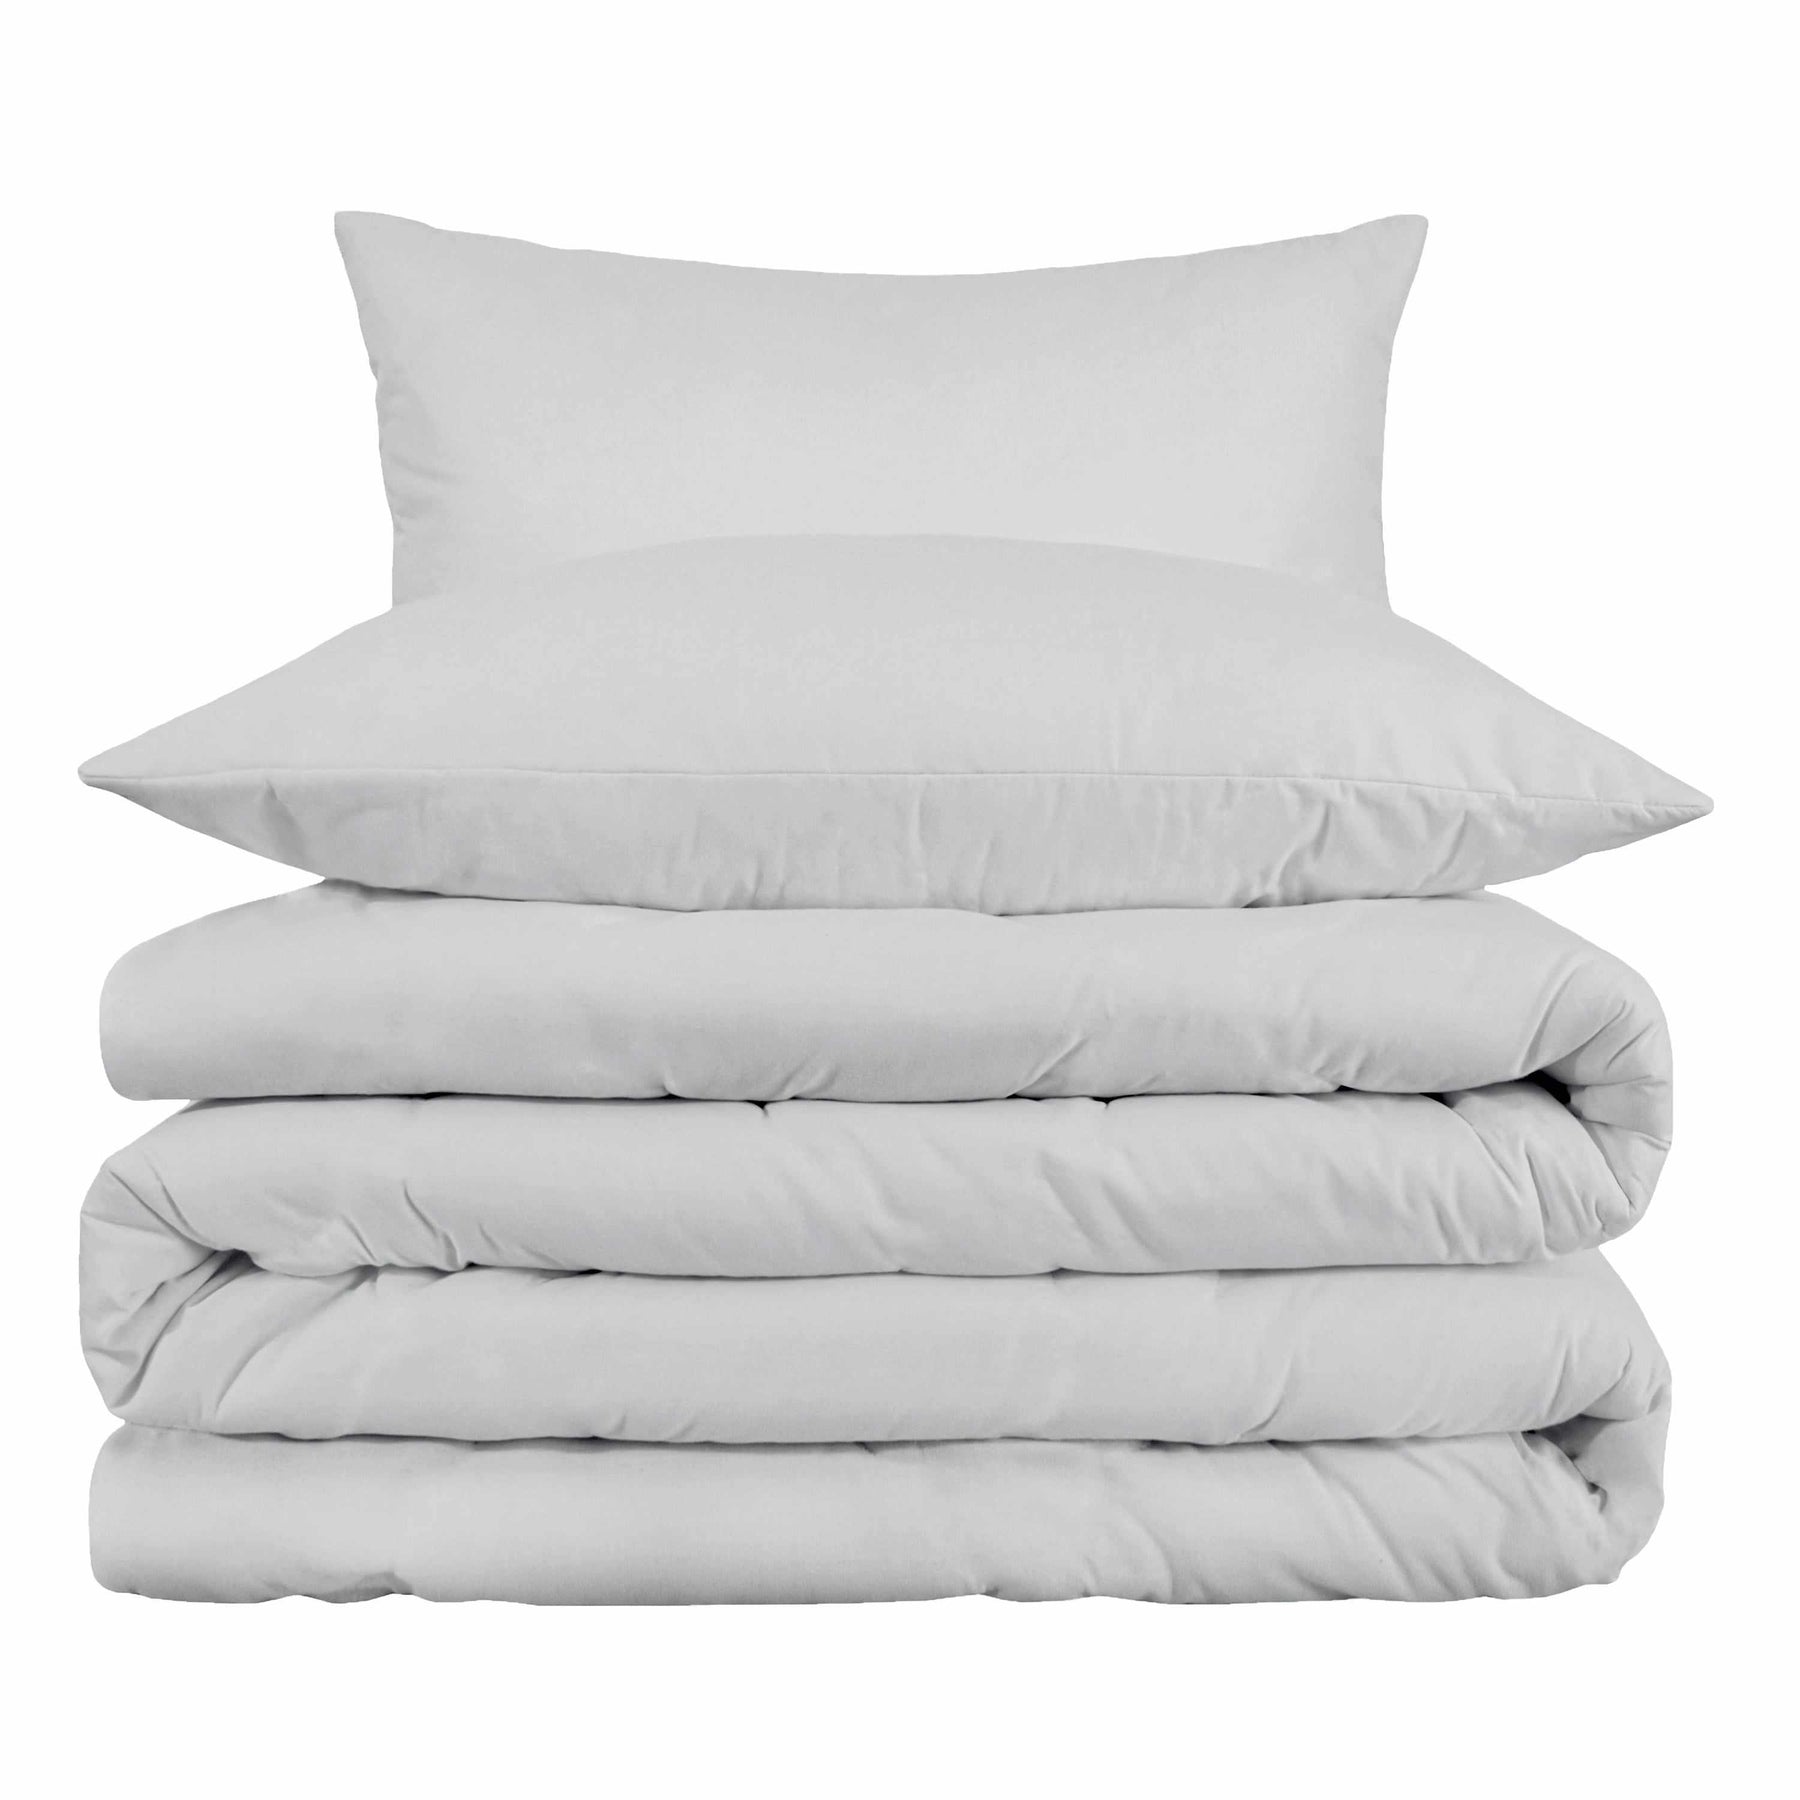  Superior Egyptian Cotton Solid All-Season Duvet Cover Set with Button Closure - Platinum